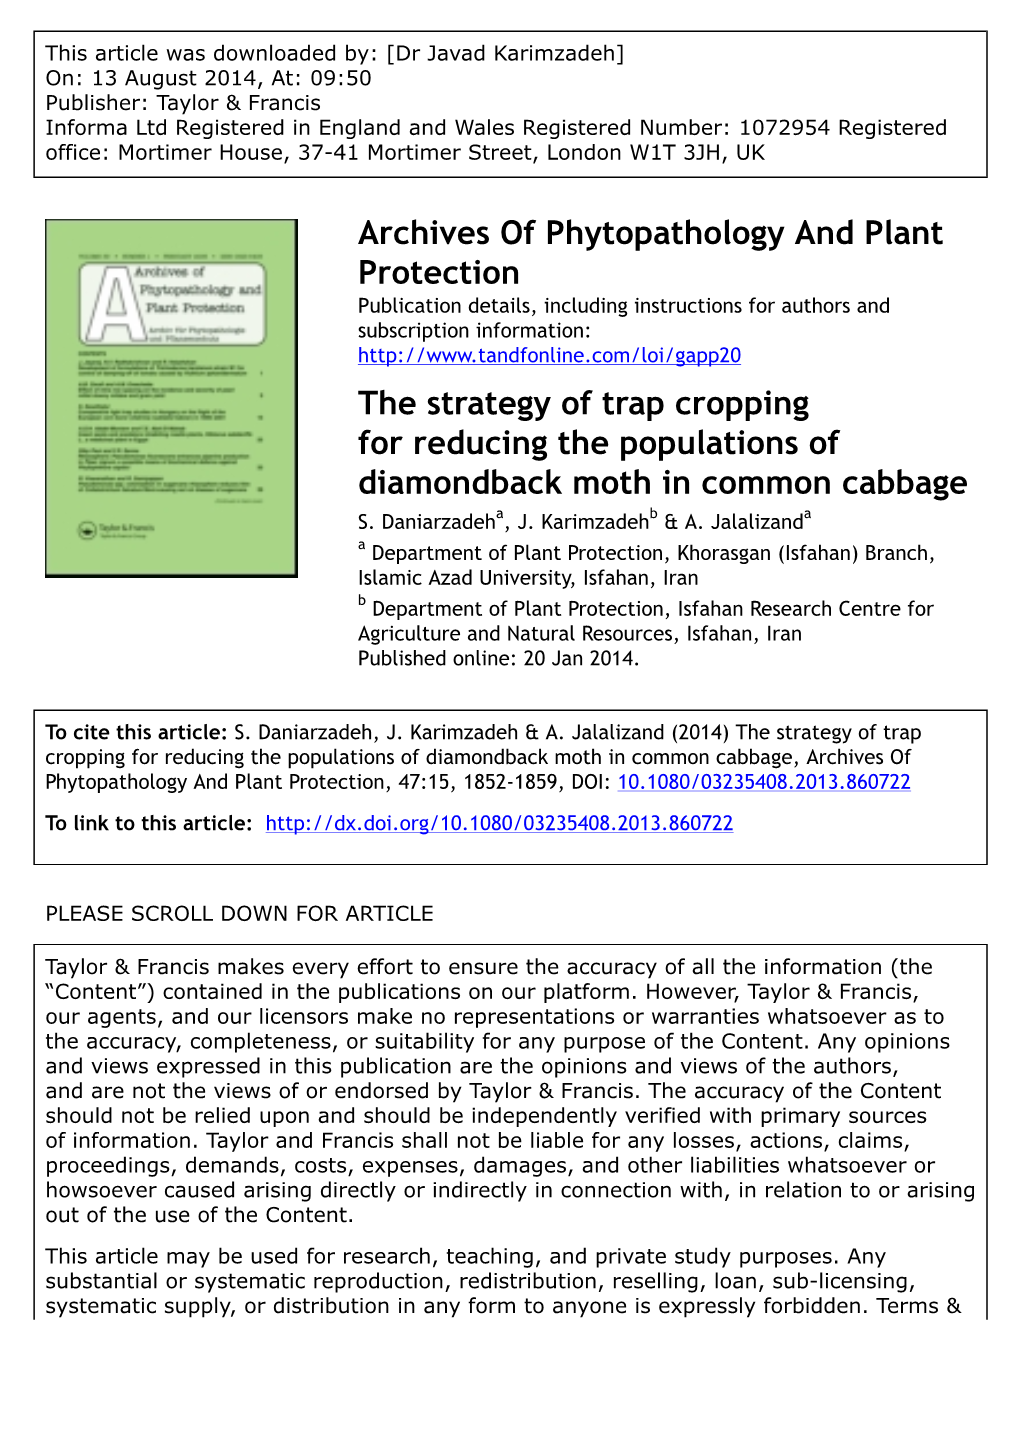 The Strategy of Trap Cropping for Reducing the Populations of Diamondback Moth in Common Cabbage S